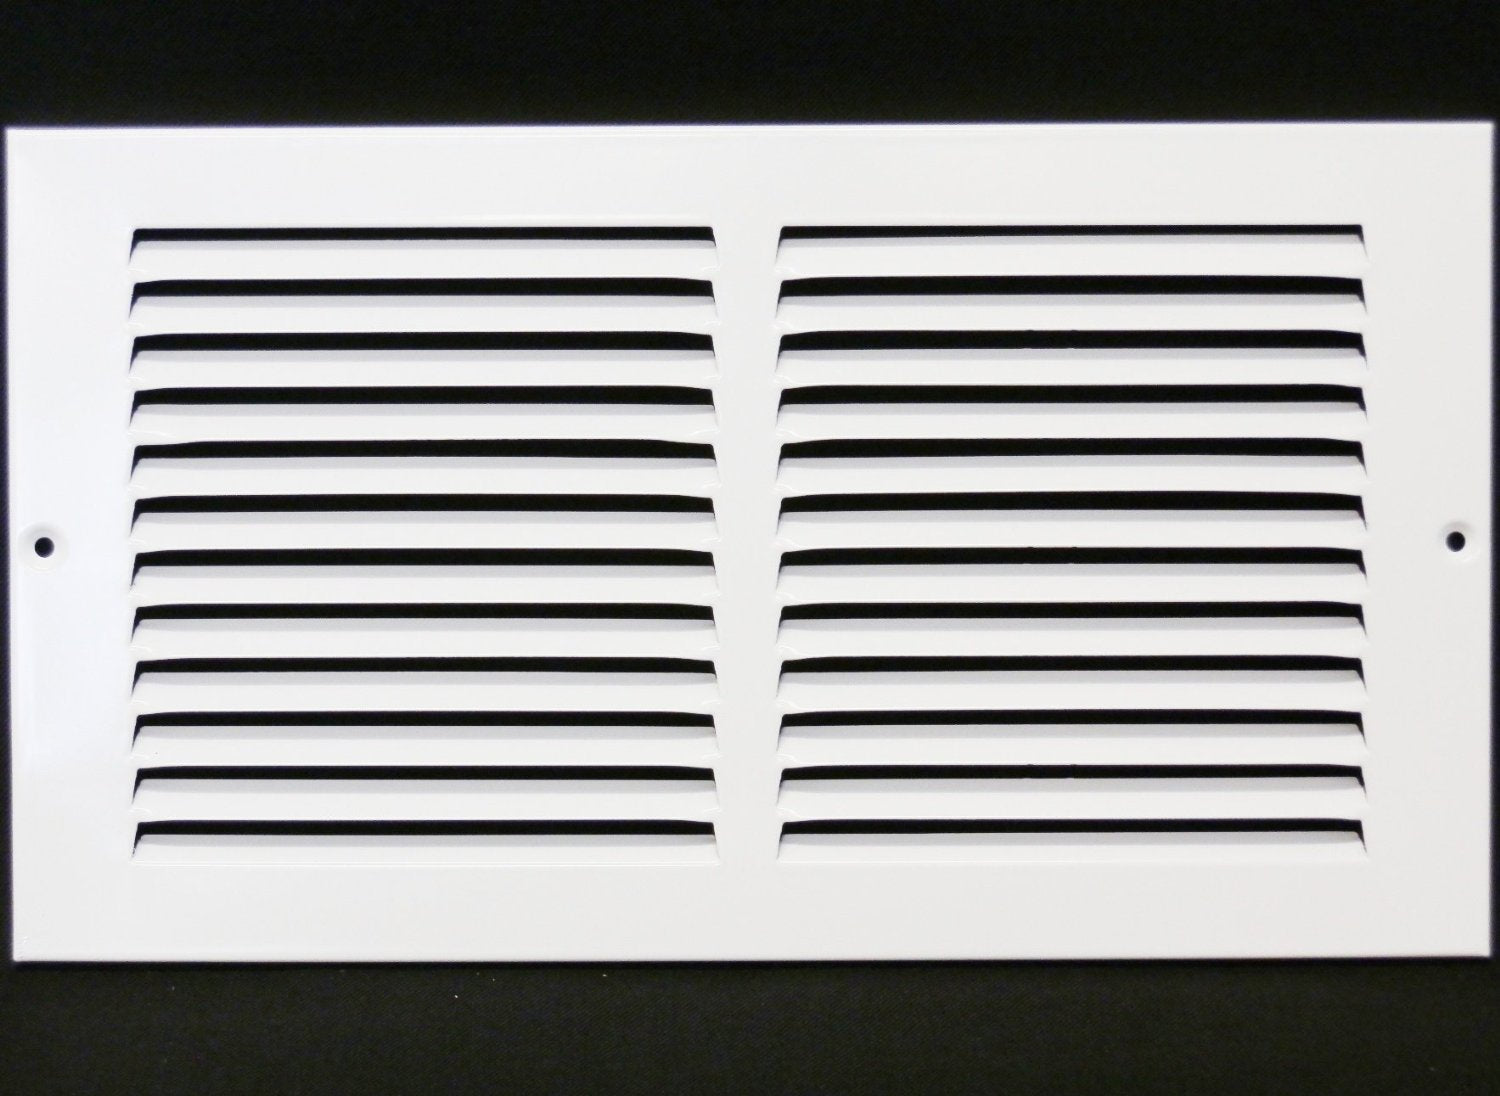 12" X 6" Air Vent Return Grilles - Sidewall and Ceiling - Steel